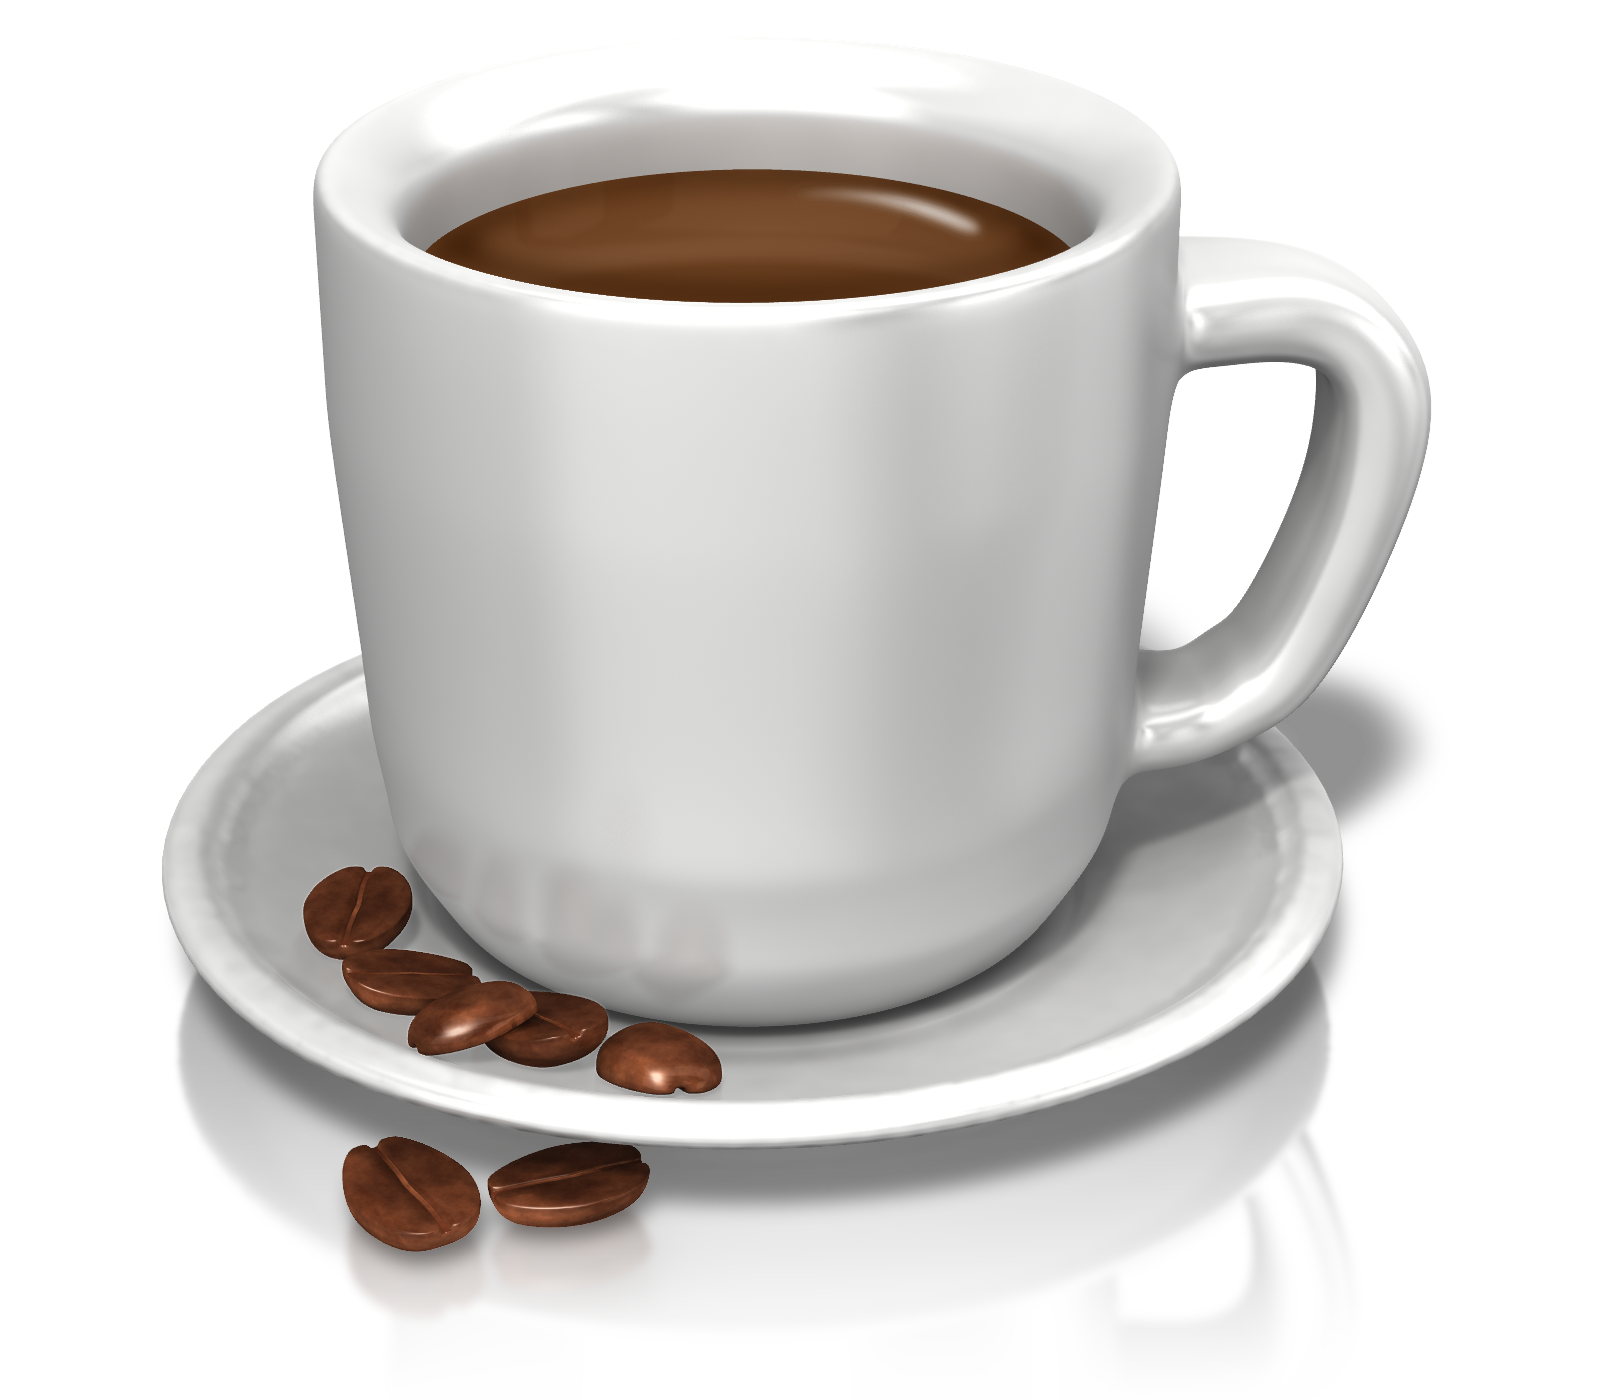 Coffee Cup Transparent Image PNG Image